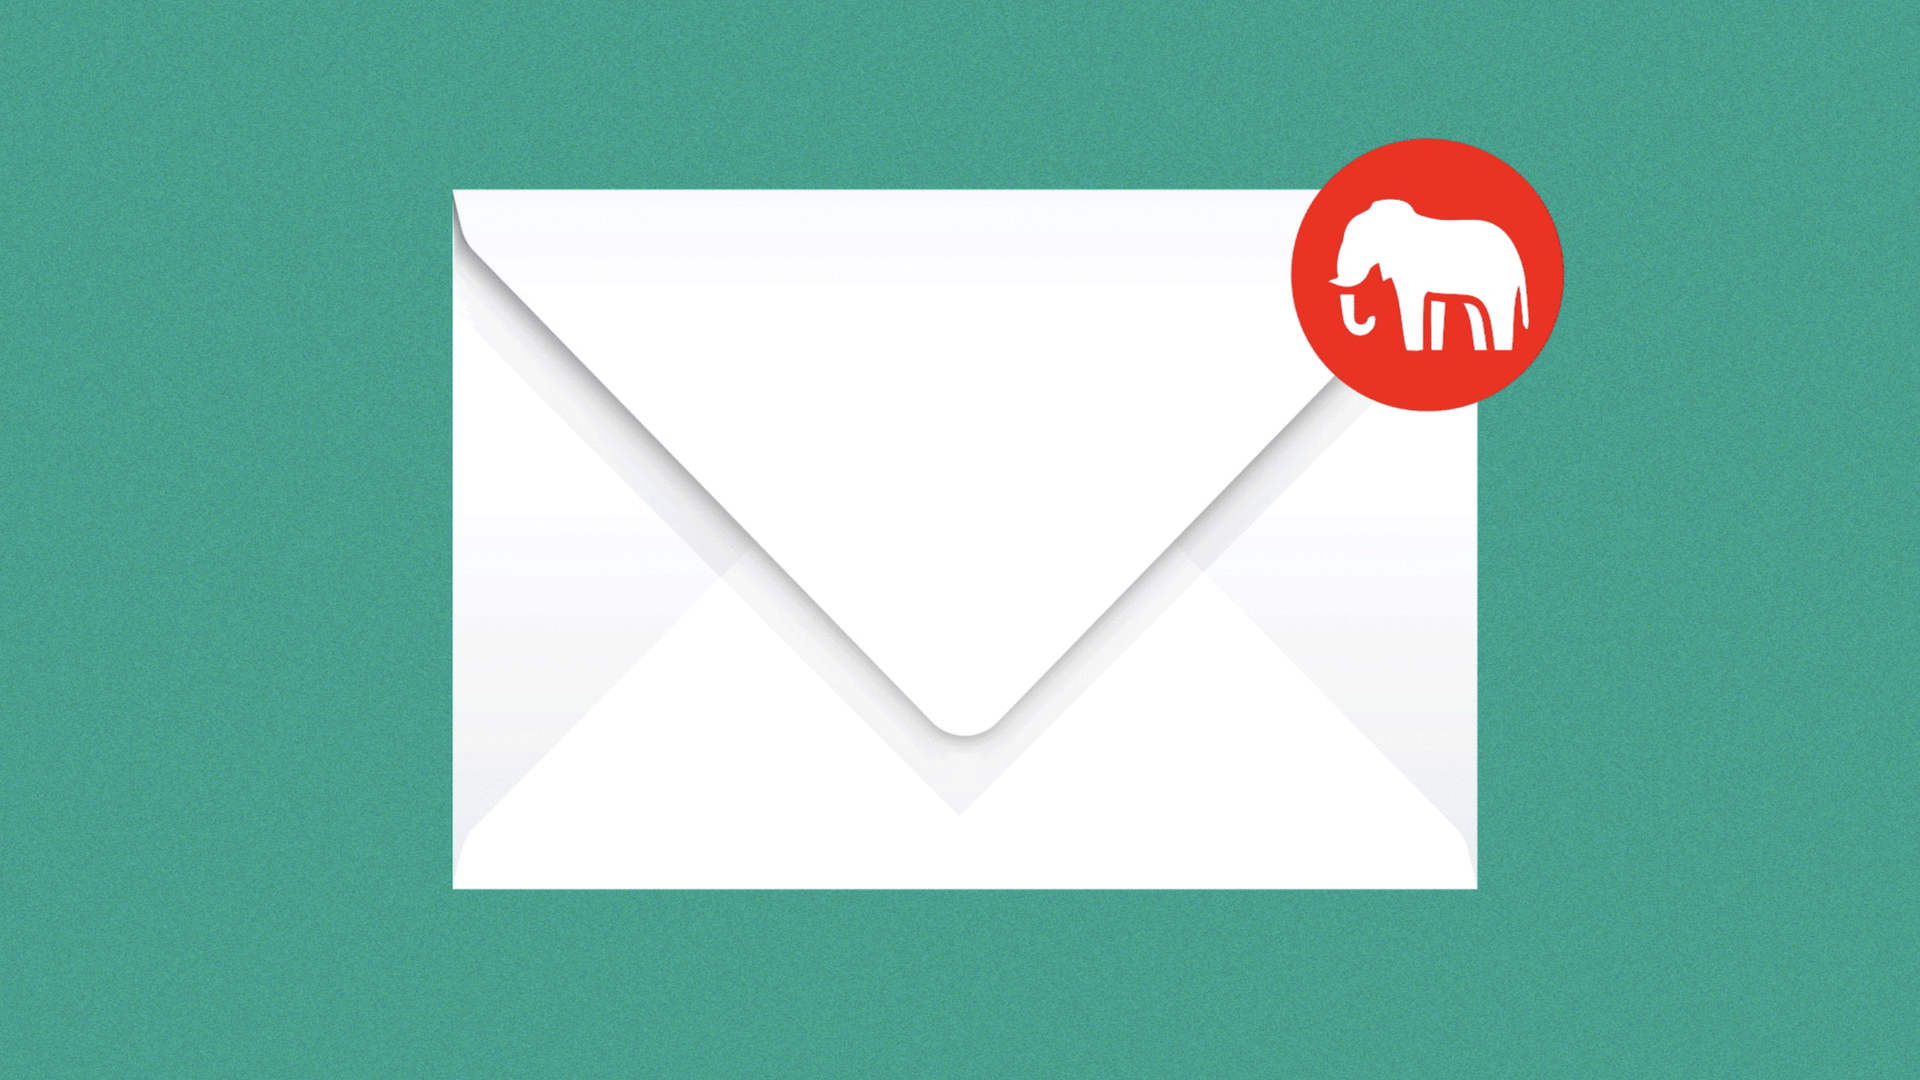 Illustration of an envelope with a notifications dot showing an elephant.